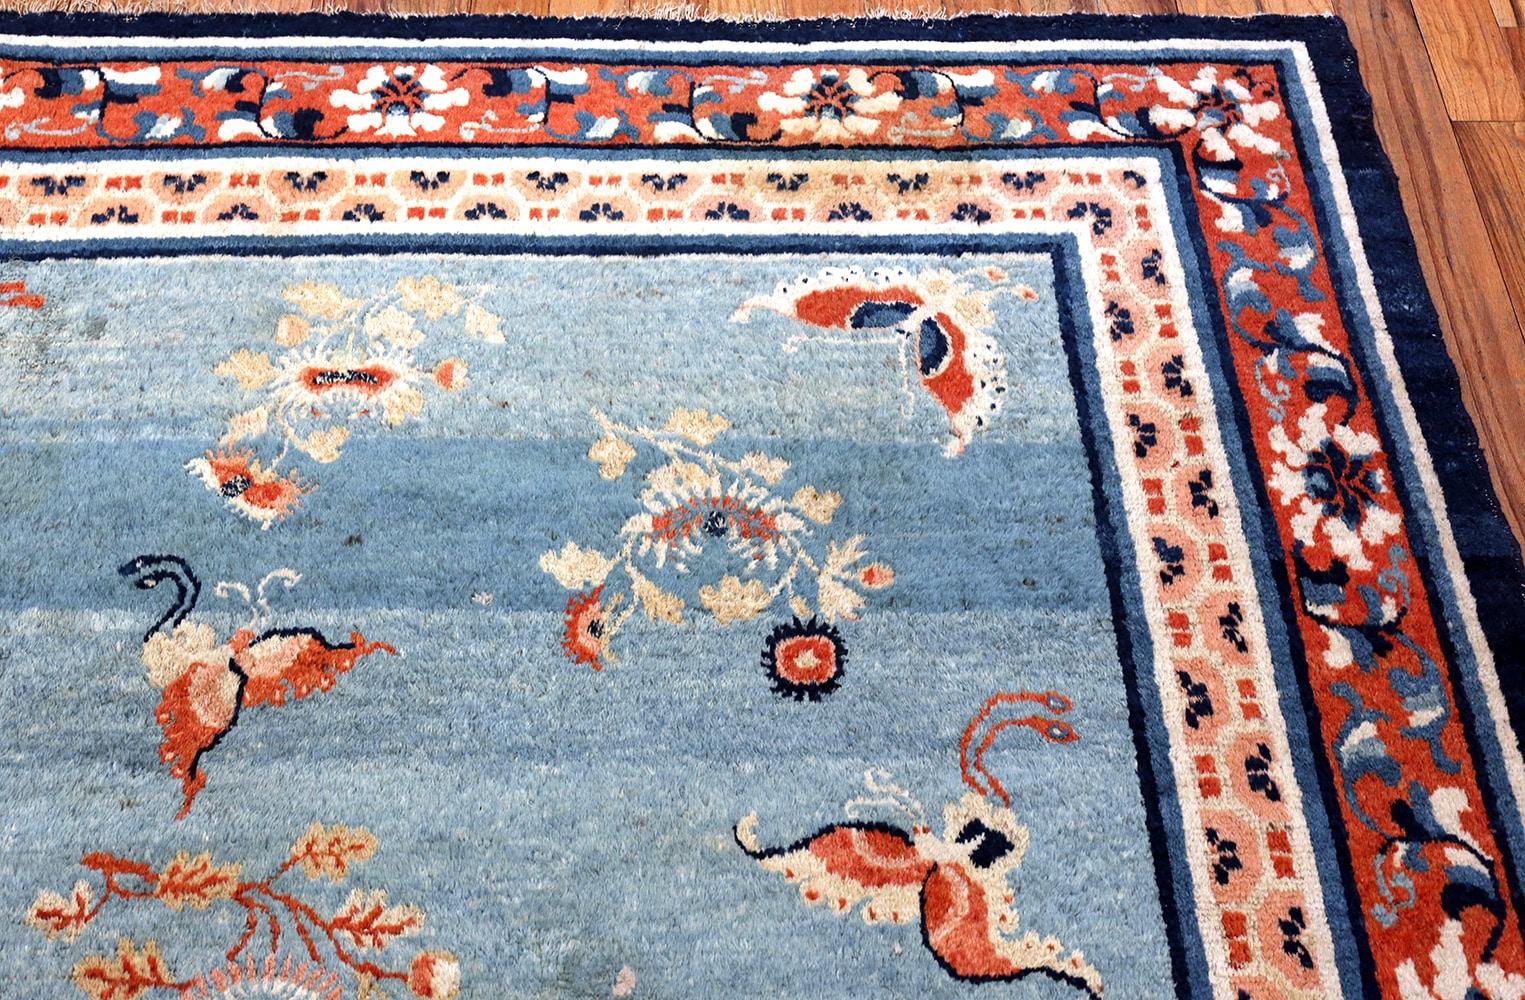 18th Century Kansu Carpet from China. Size: 9 ft 4 in x 14 ft 2 in 4